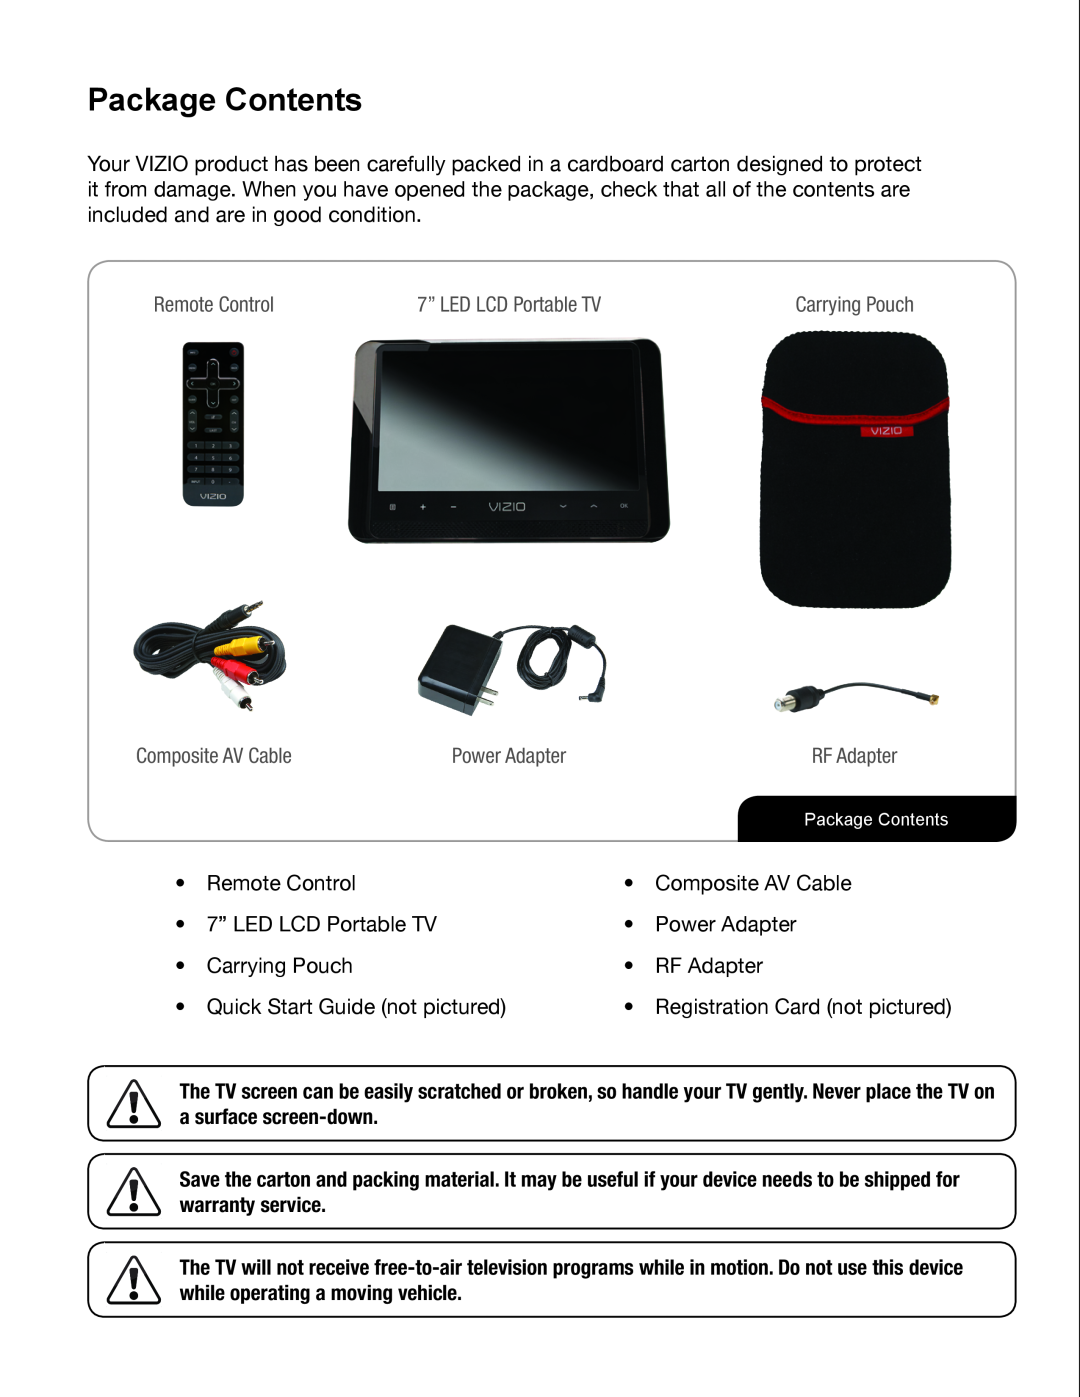 Zanussi VMB070 Package Contents, Remote Control, 7” LED LCD Portable TV, Composite AV Cable, Power Adapter, RF Adapter 